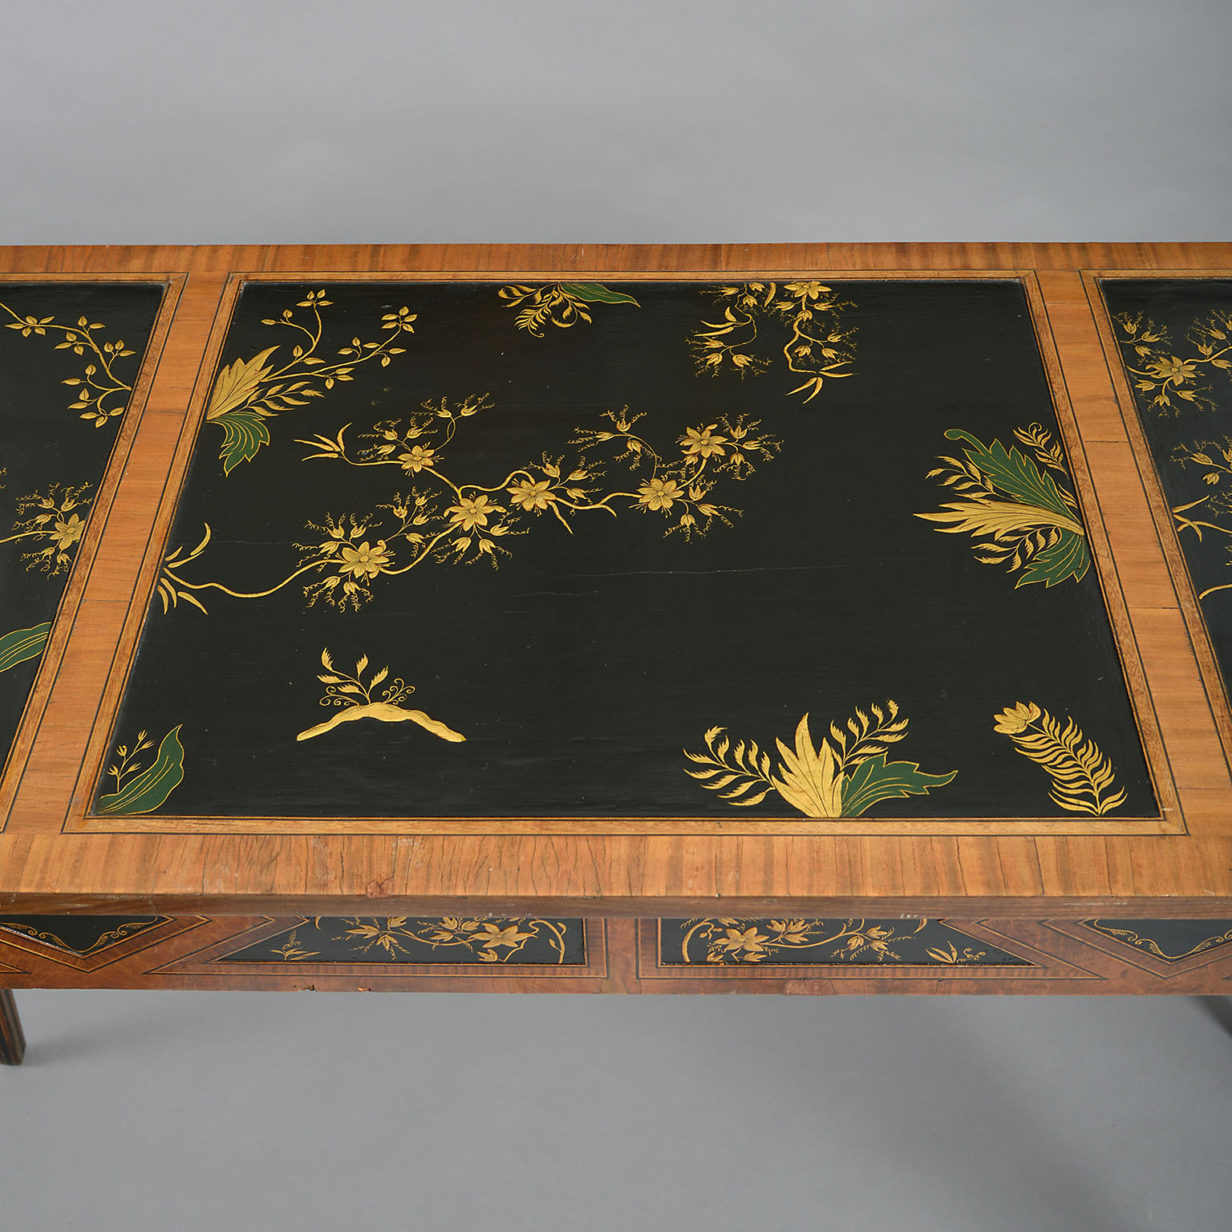 An 18th century satinwood side table inset with lacquer panels